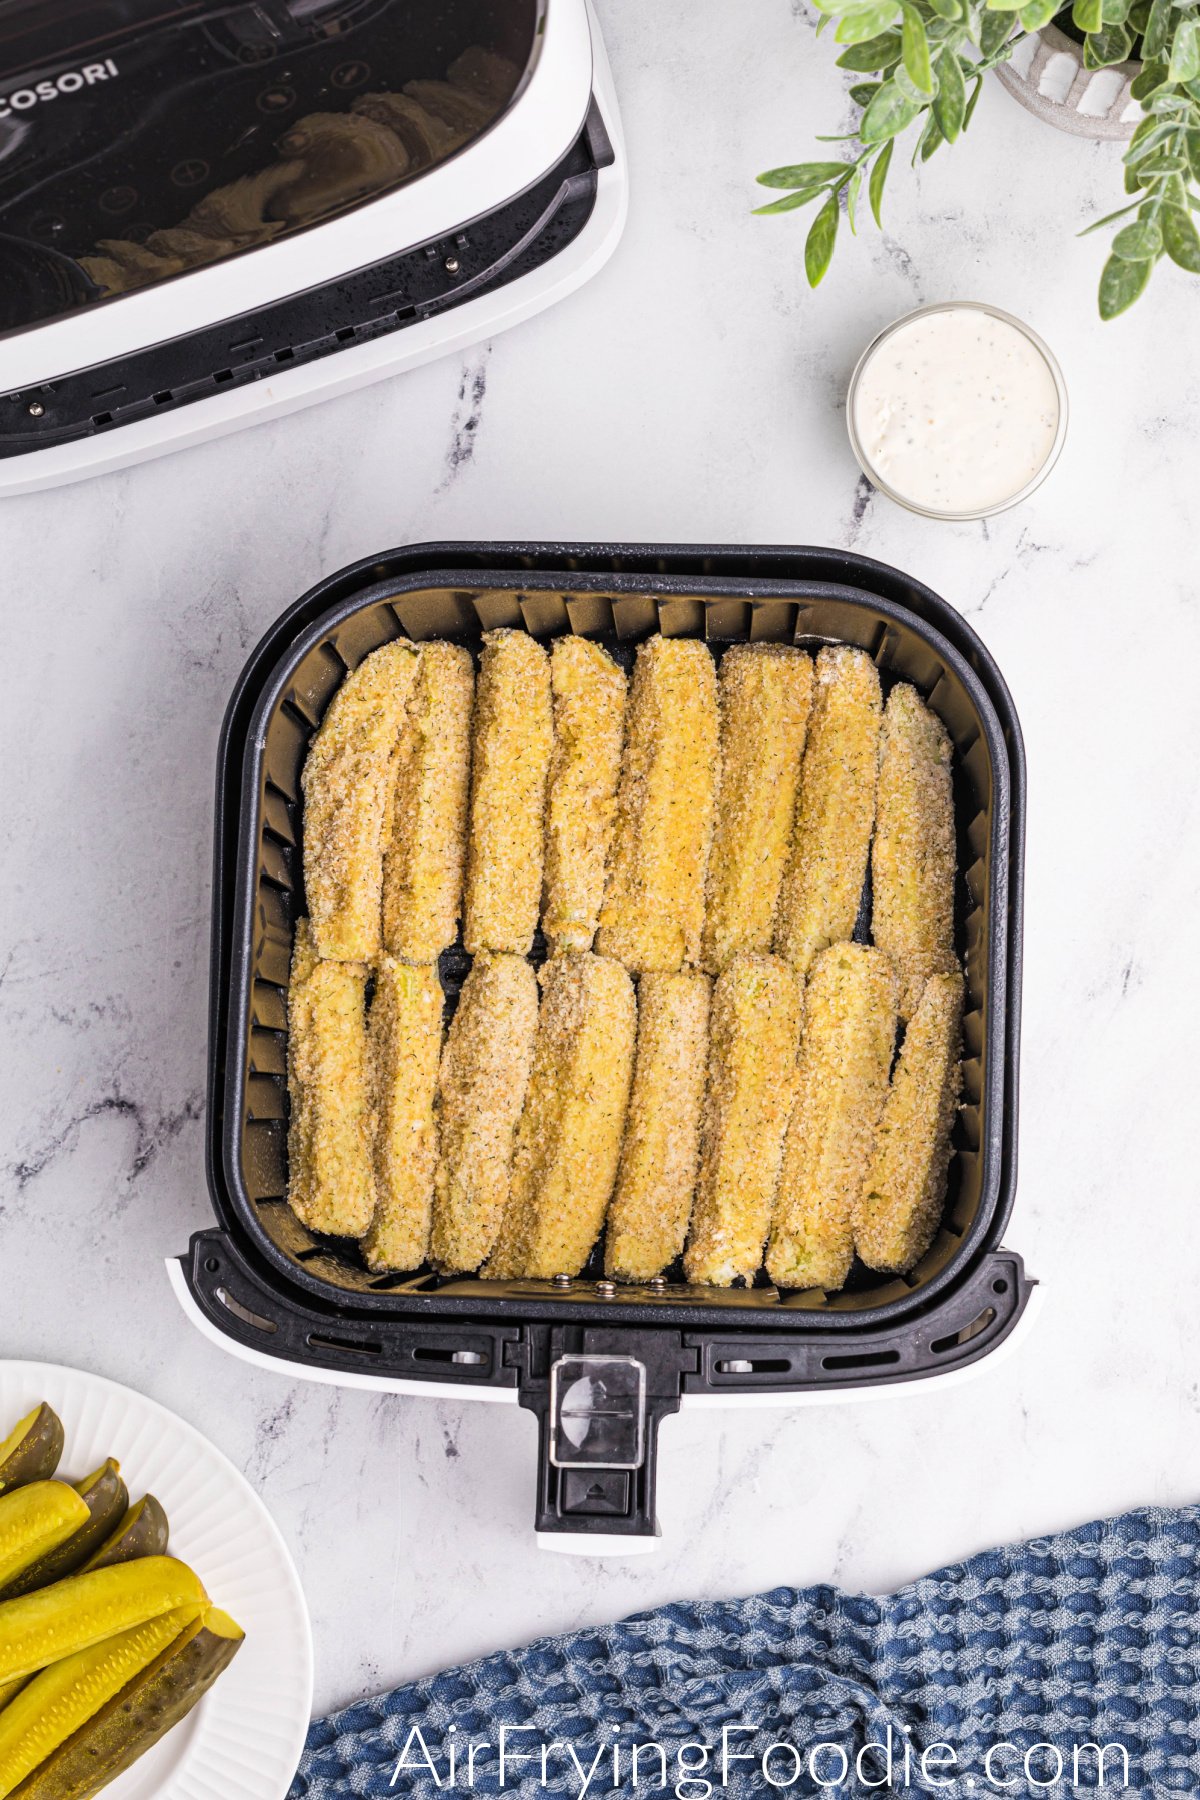 Dipped dill pickle spears in a single layer in the air fryer basket.